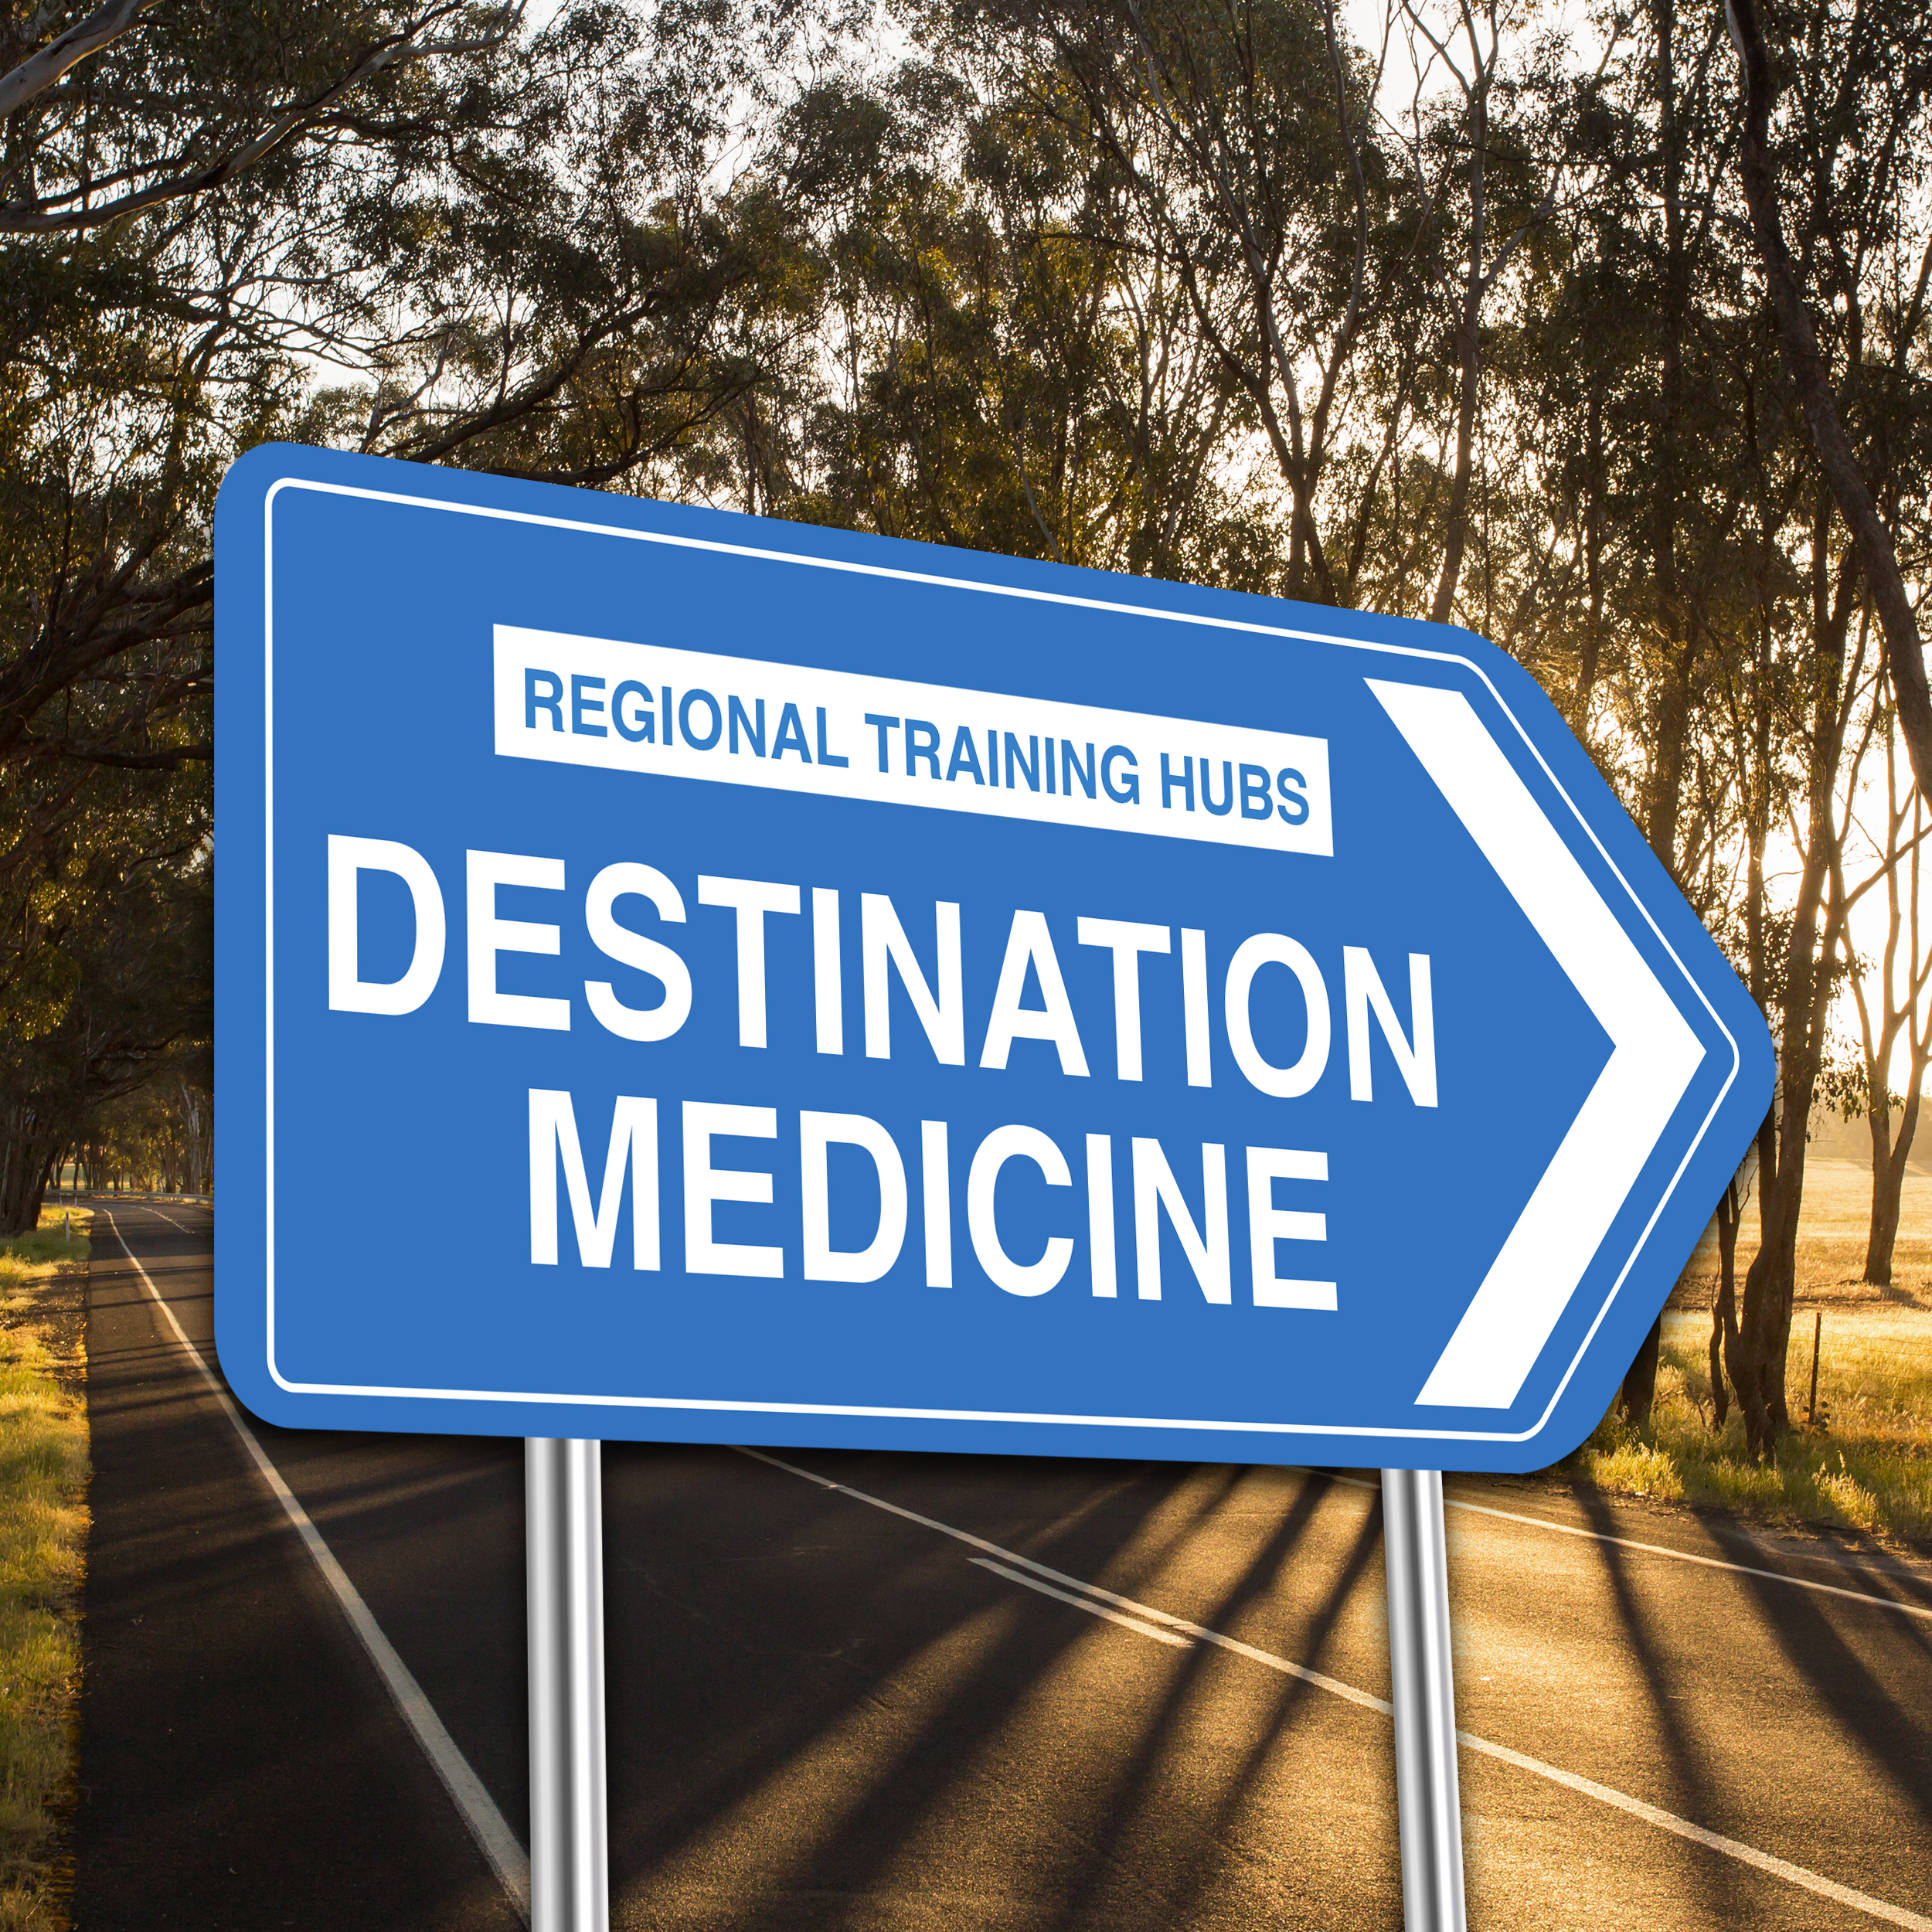 Doctors in Training: Community Spirit in the Country – why Dr Marty Ryan chose Rural Generalism